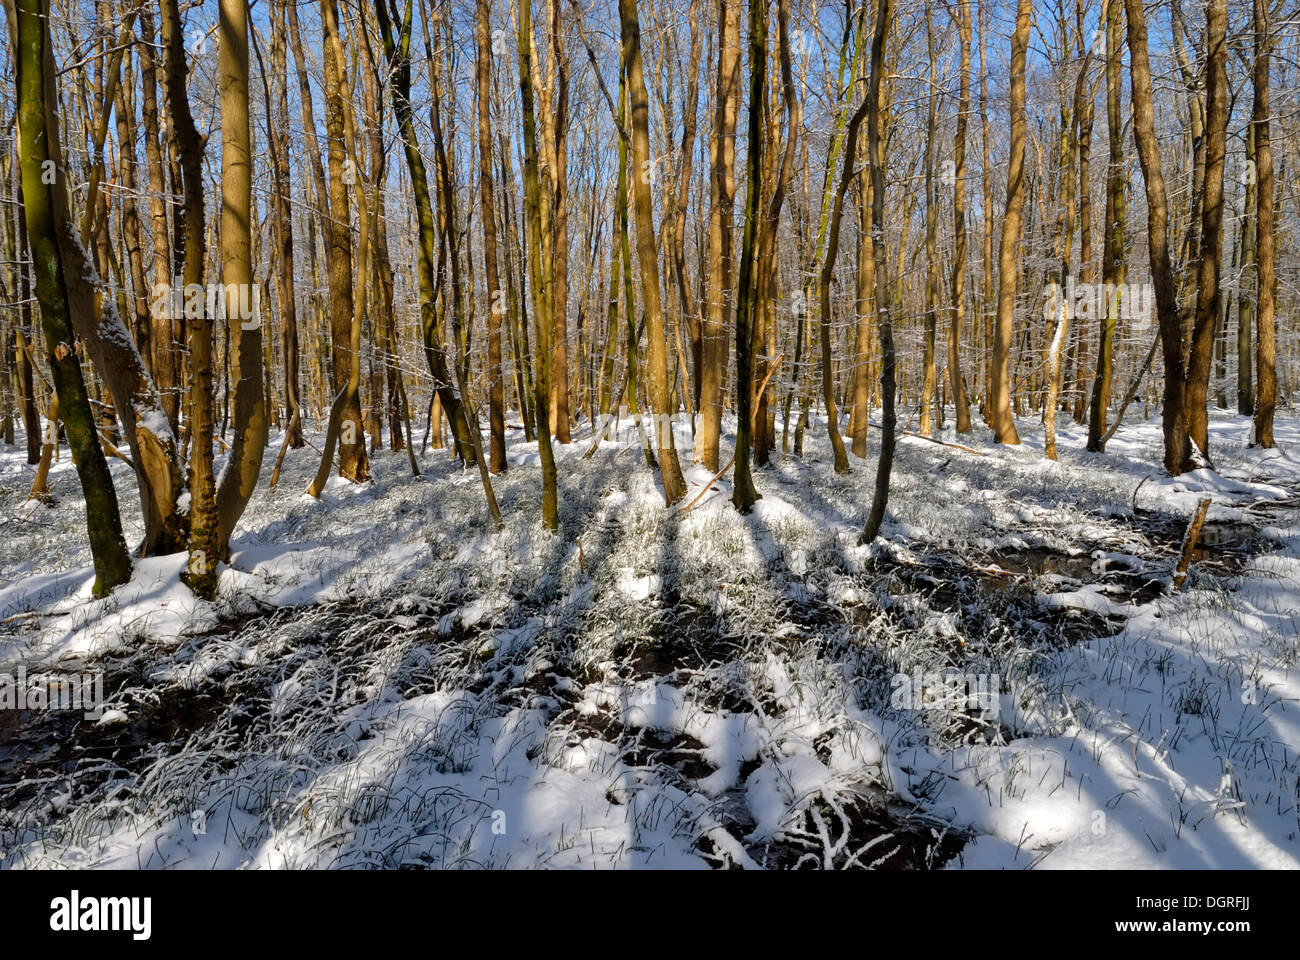 Wintry carr or marshland forest Stock Photo